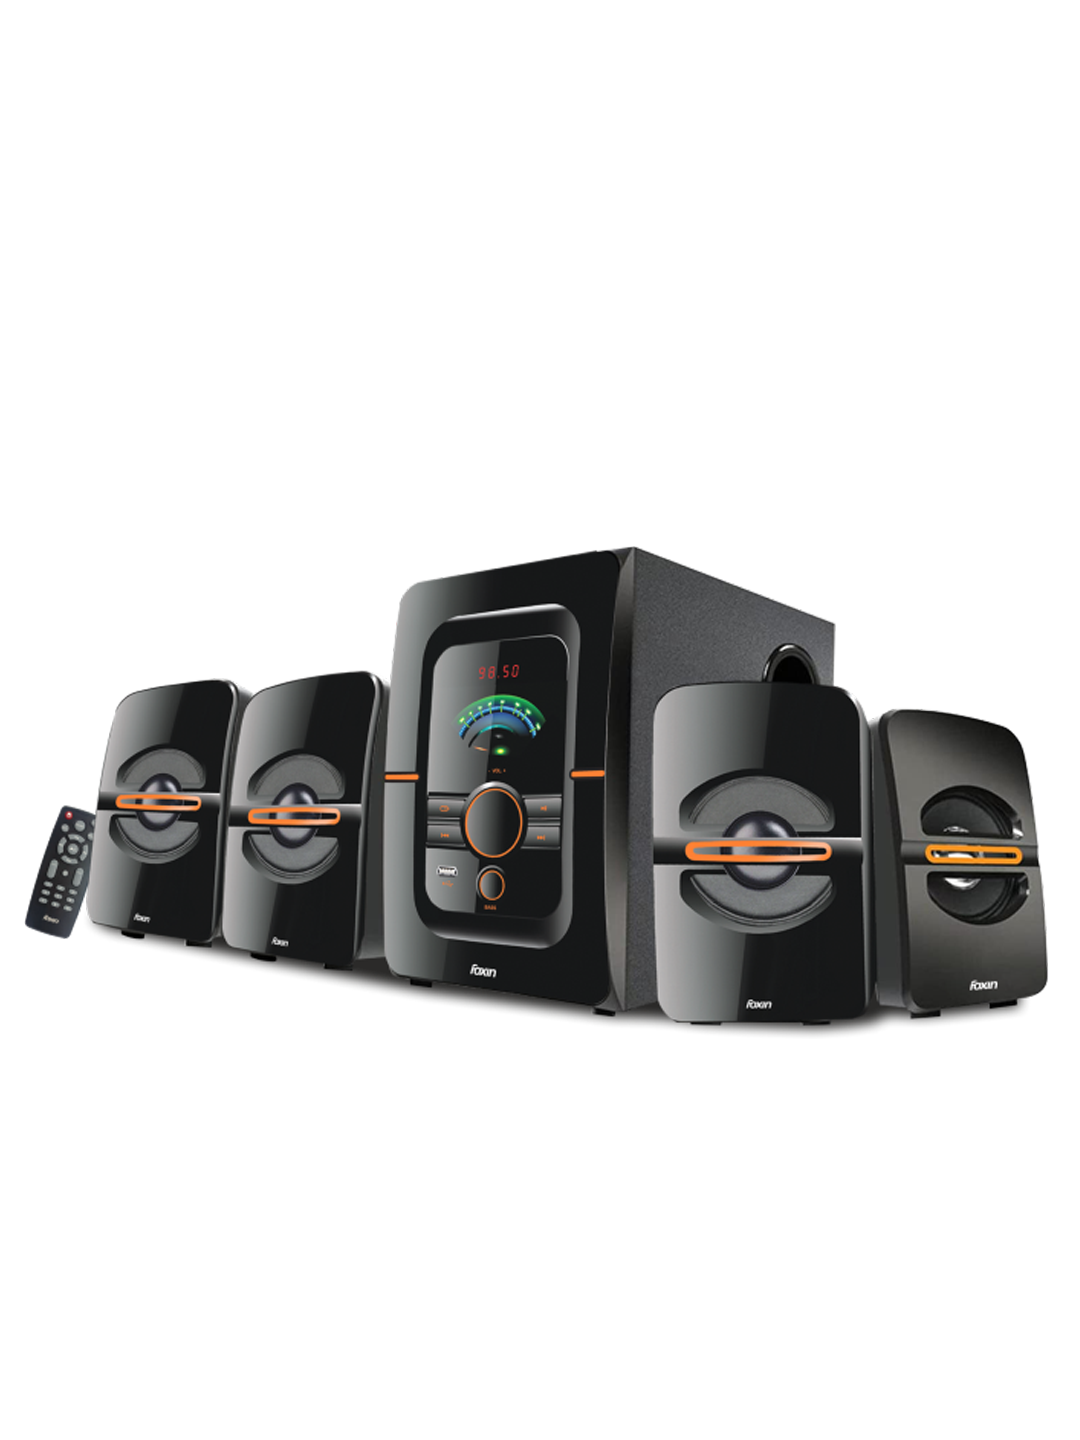 Foxin FMS 4450 4.1 Channel Multimedia Speakers 85 Watt/Foxin home theater/ music system for home/party speakers